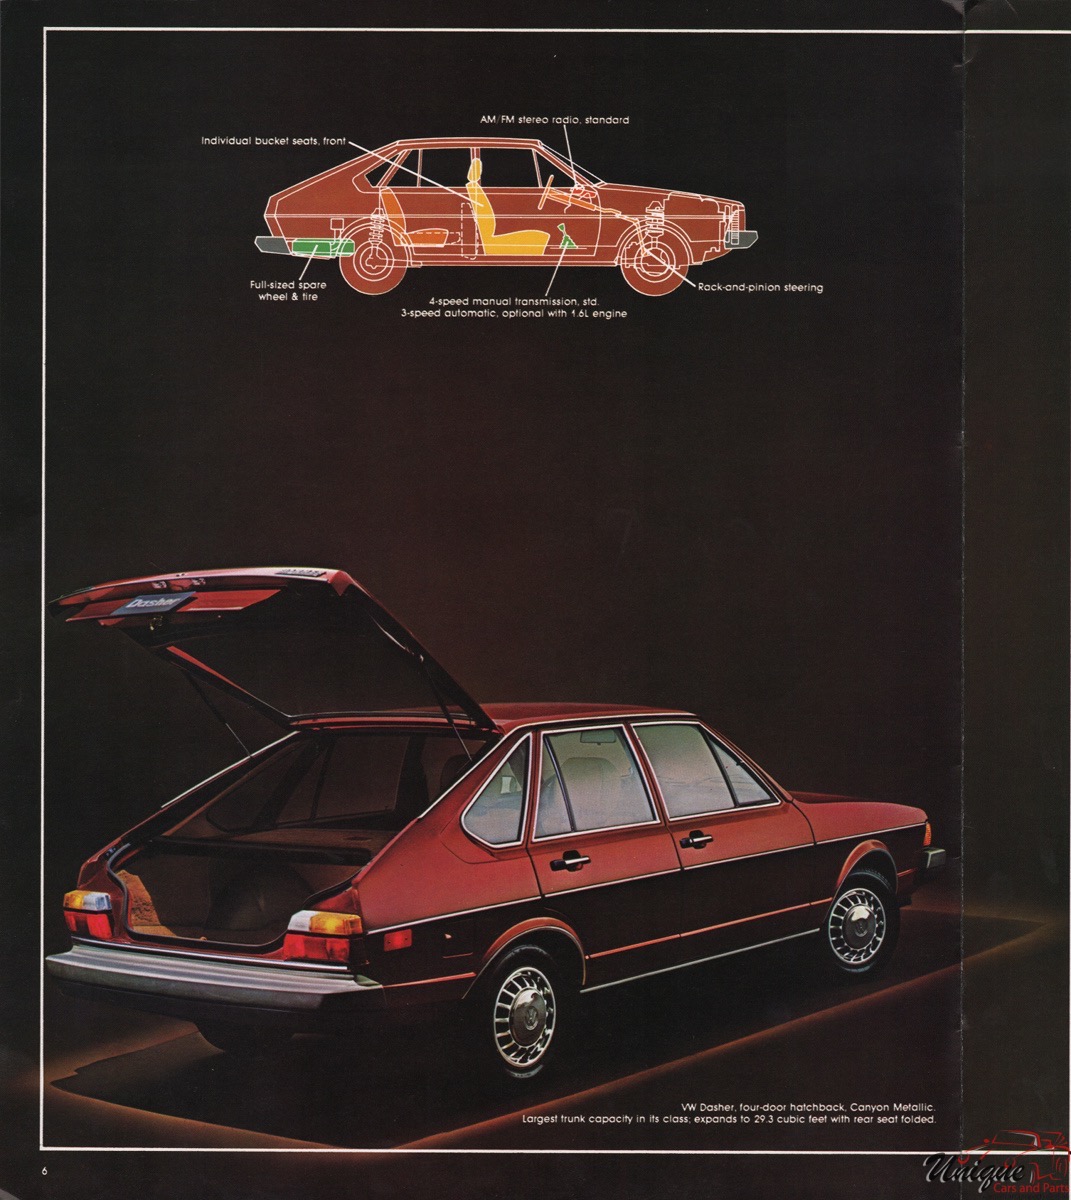 1980 VW Dasher Brochure Page 3